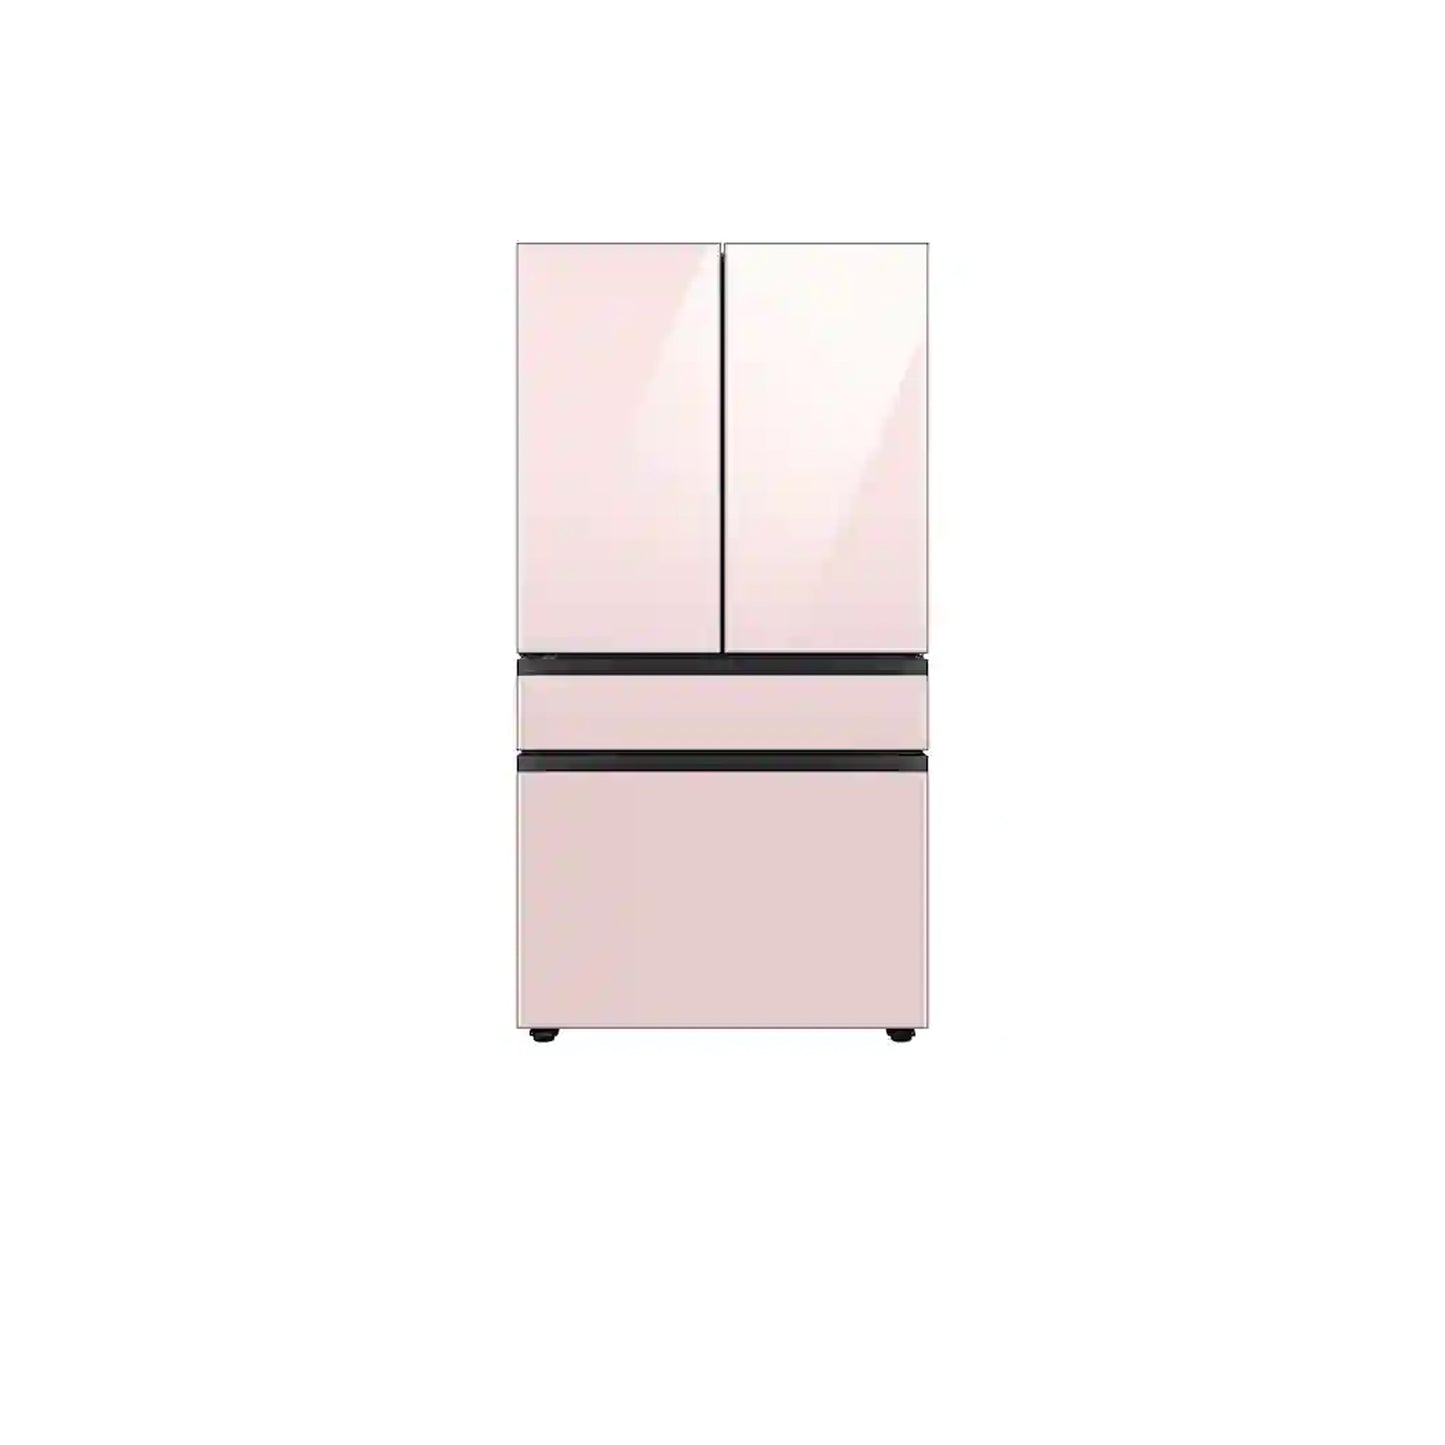 Bespoke 4-Door French Door Refrigerator (23 cu. ft.) with Beverage Center™ in Morning Blue Glass Top Panels and White Glass Middle and Bottom Panels